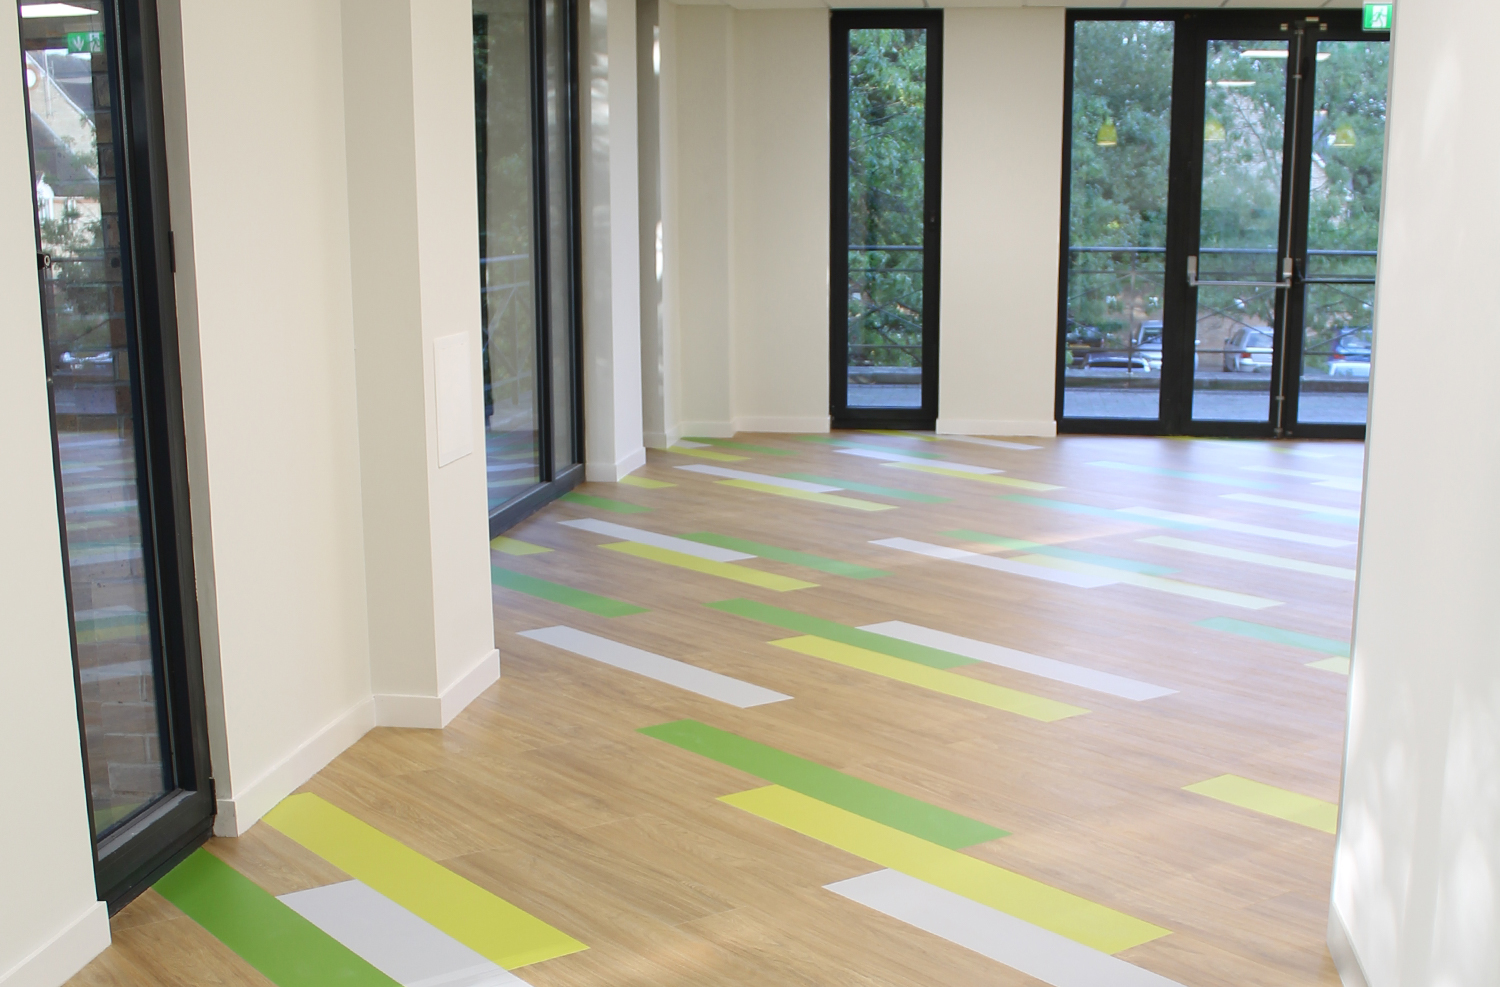 Momenta vinyl tiles with added colour - ideal commercial flooring choices